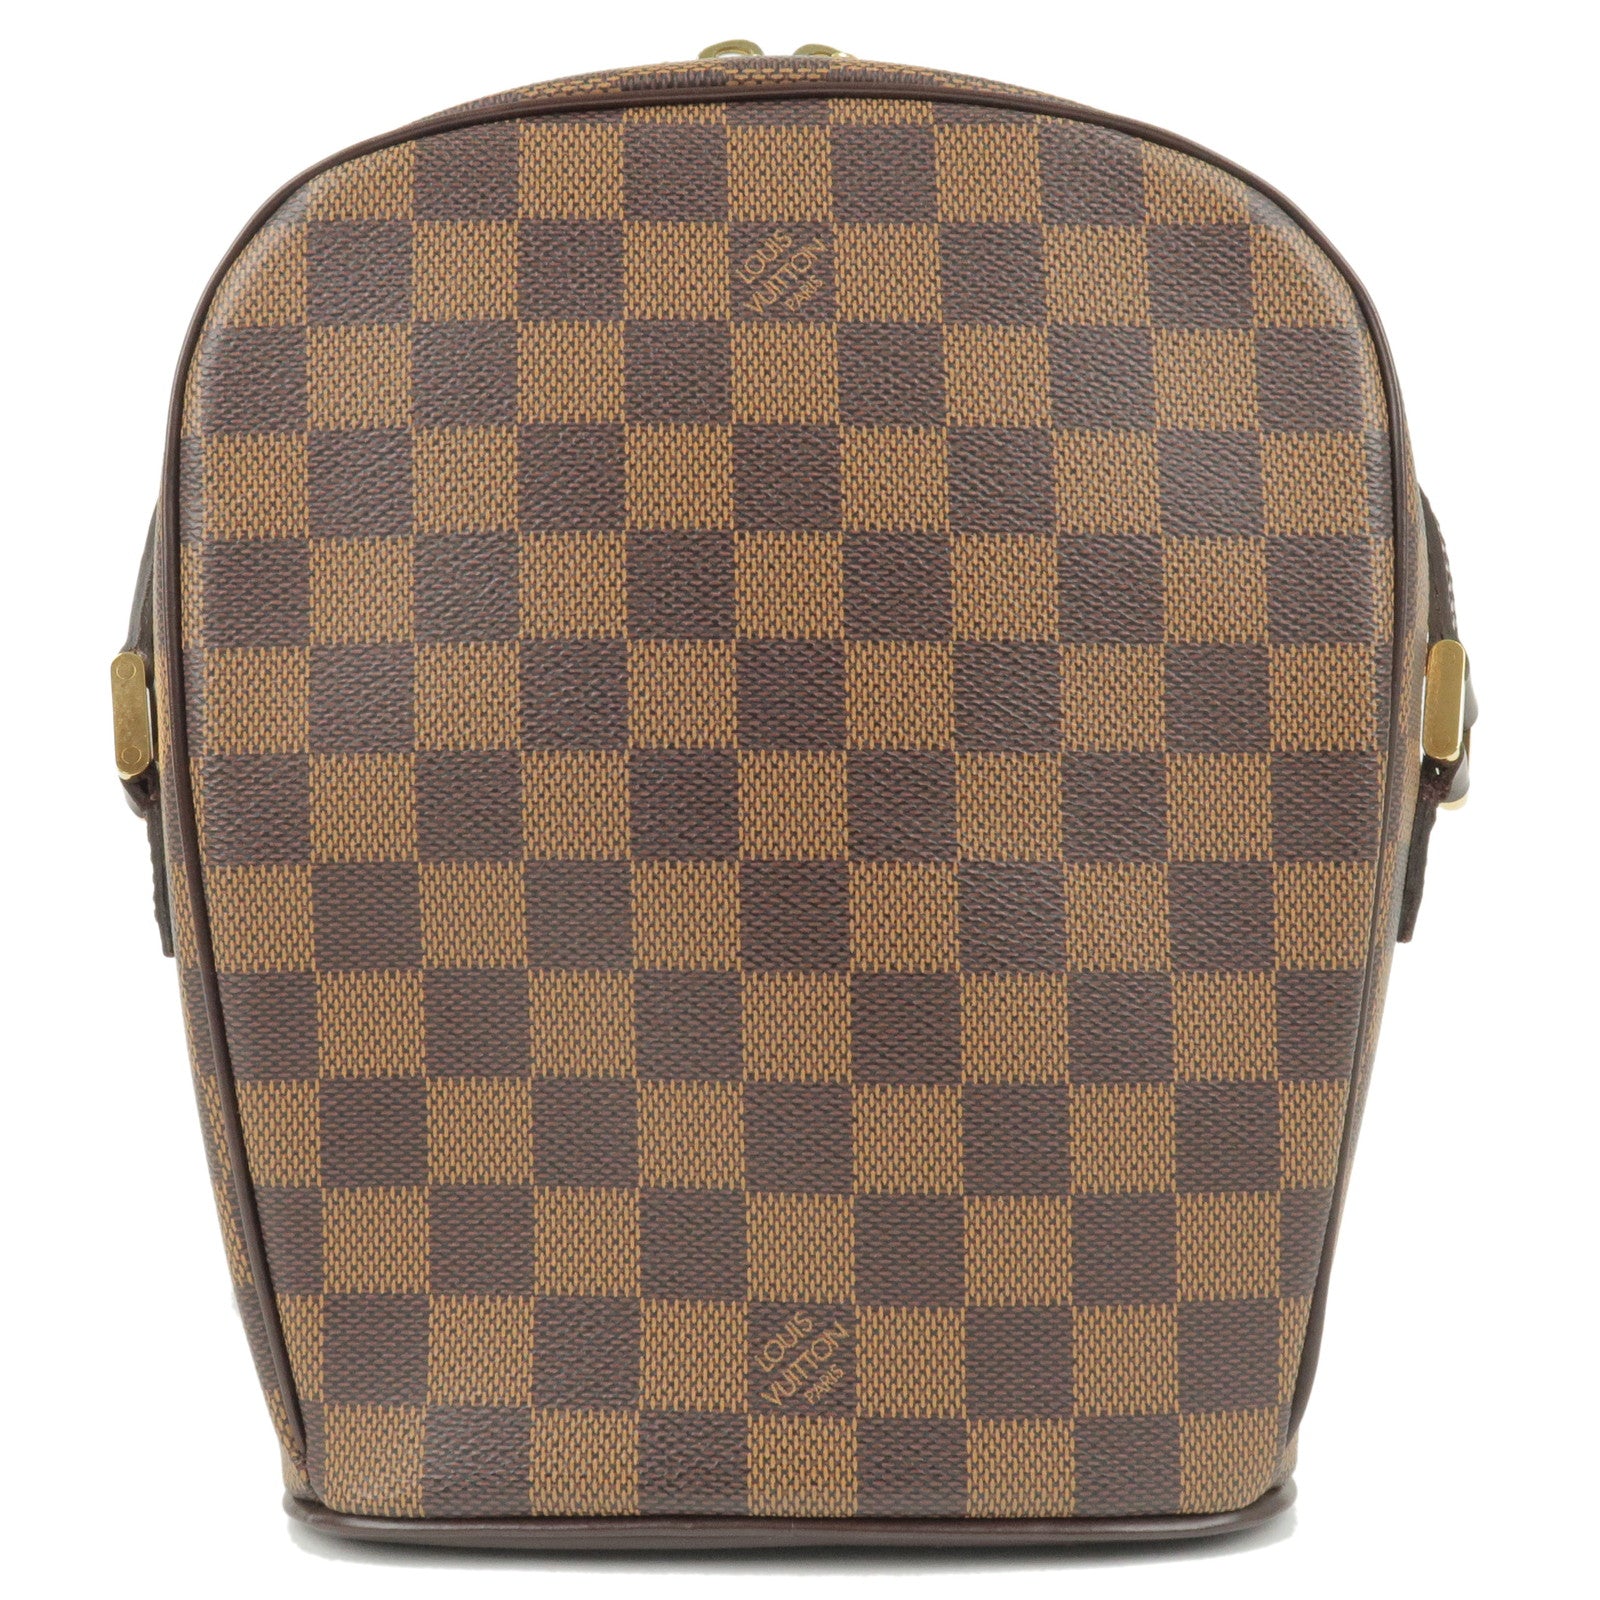 Pre-owned Louis Vuitton 2003 Ipanema Pm Damier In Brown